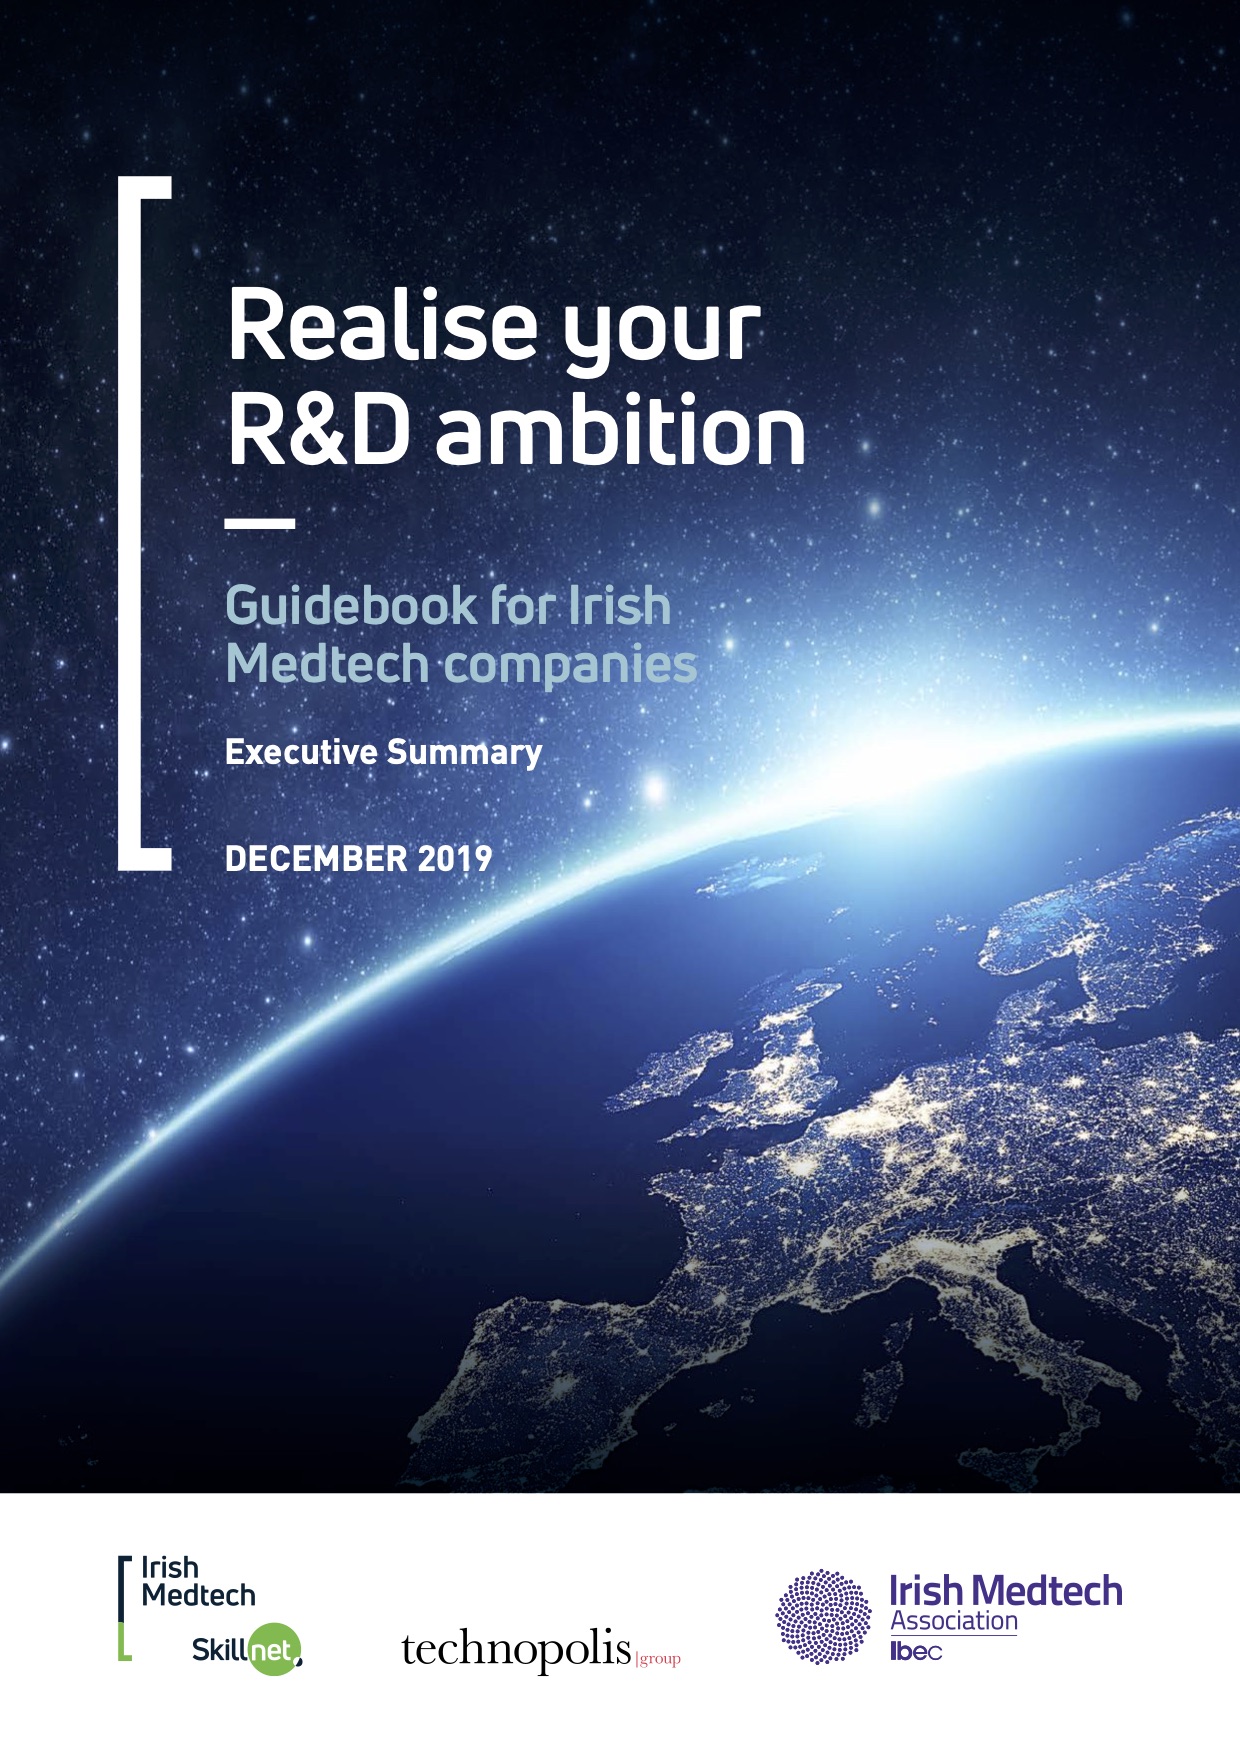 Realise your R&D ambition: guidebook for Irish Medtech companies